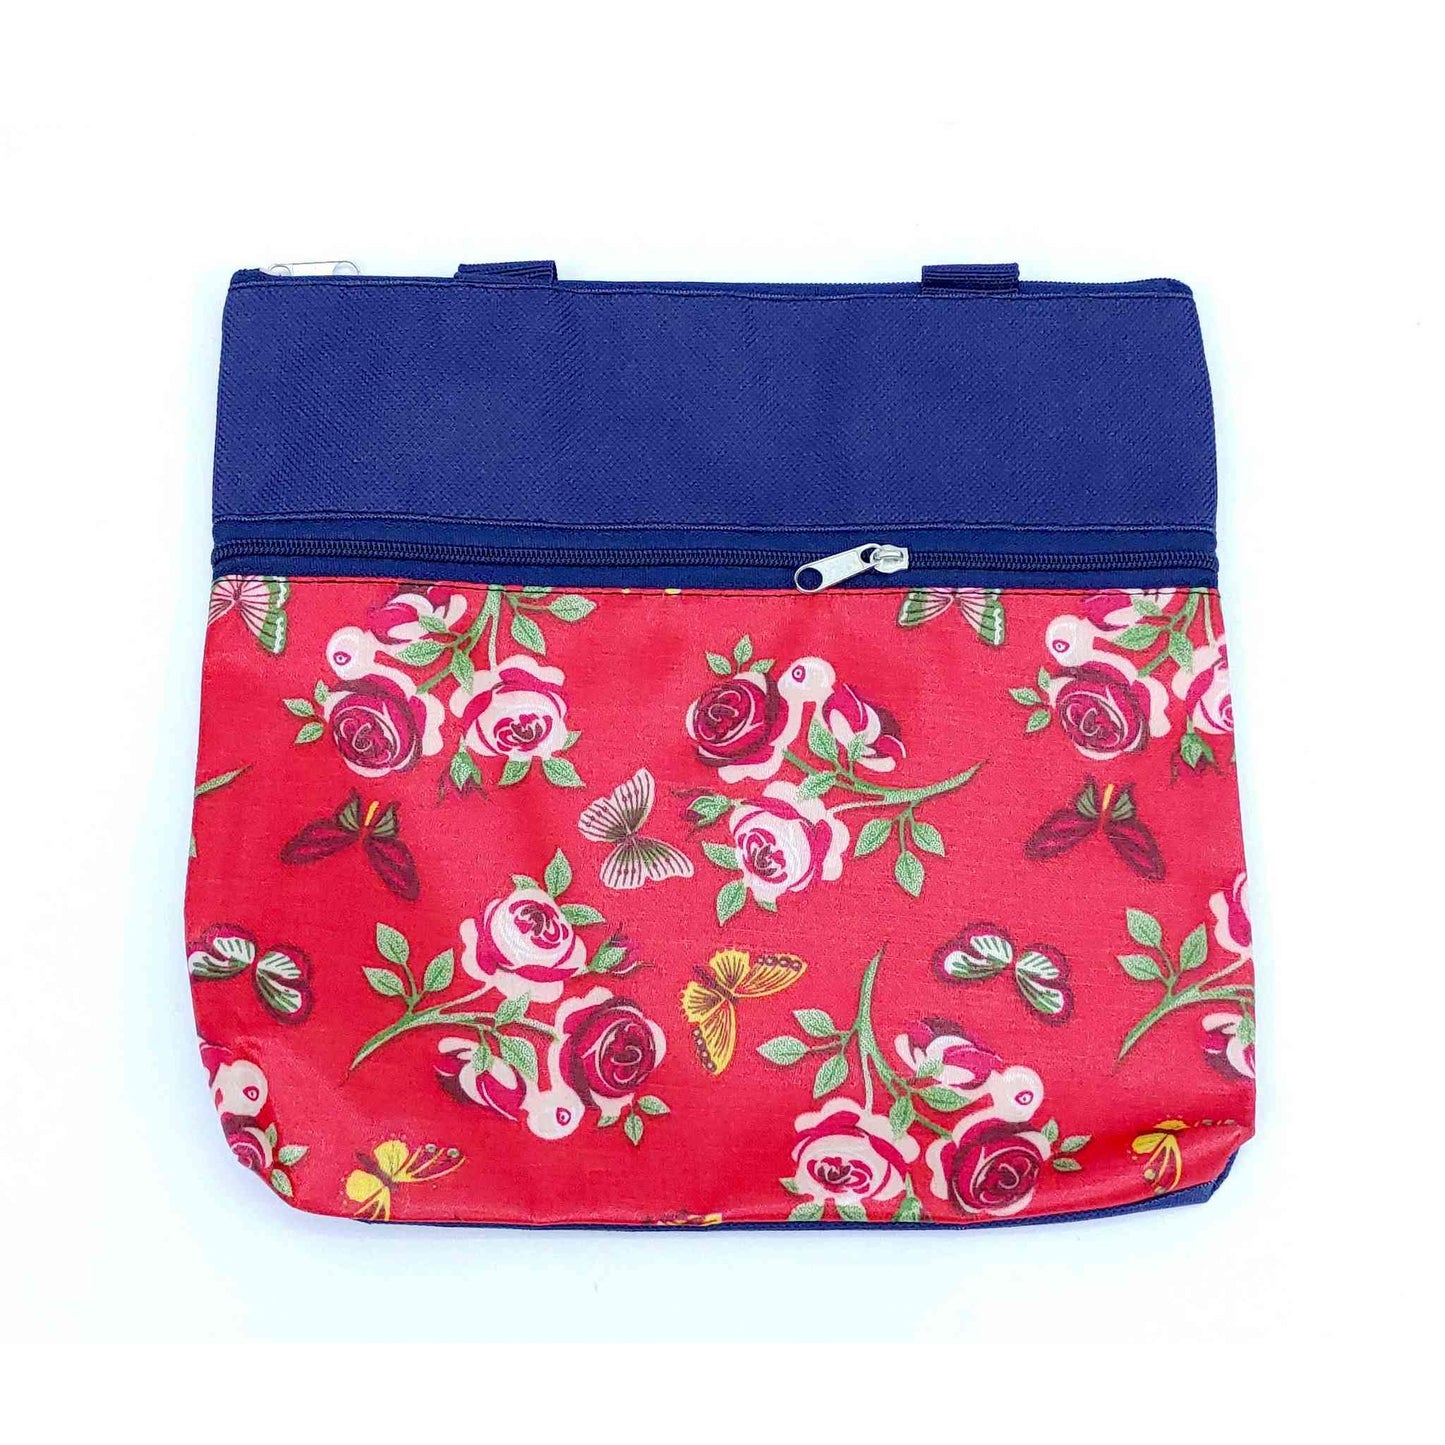 Indian Petals Imported Durable Canvas Printed multi purpose utility Medium size Bag with handles for all occasions for the girls and ladies, Design 3, Navy Blue - Indian Petals